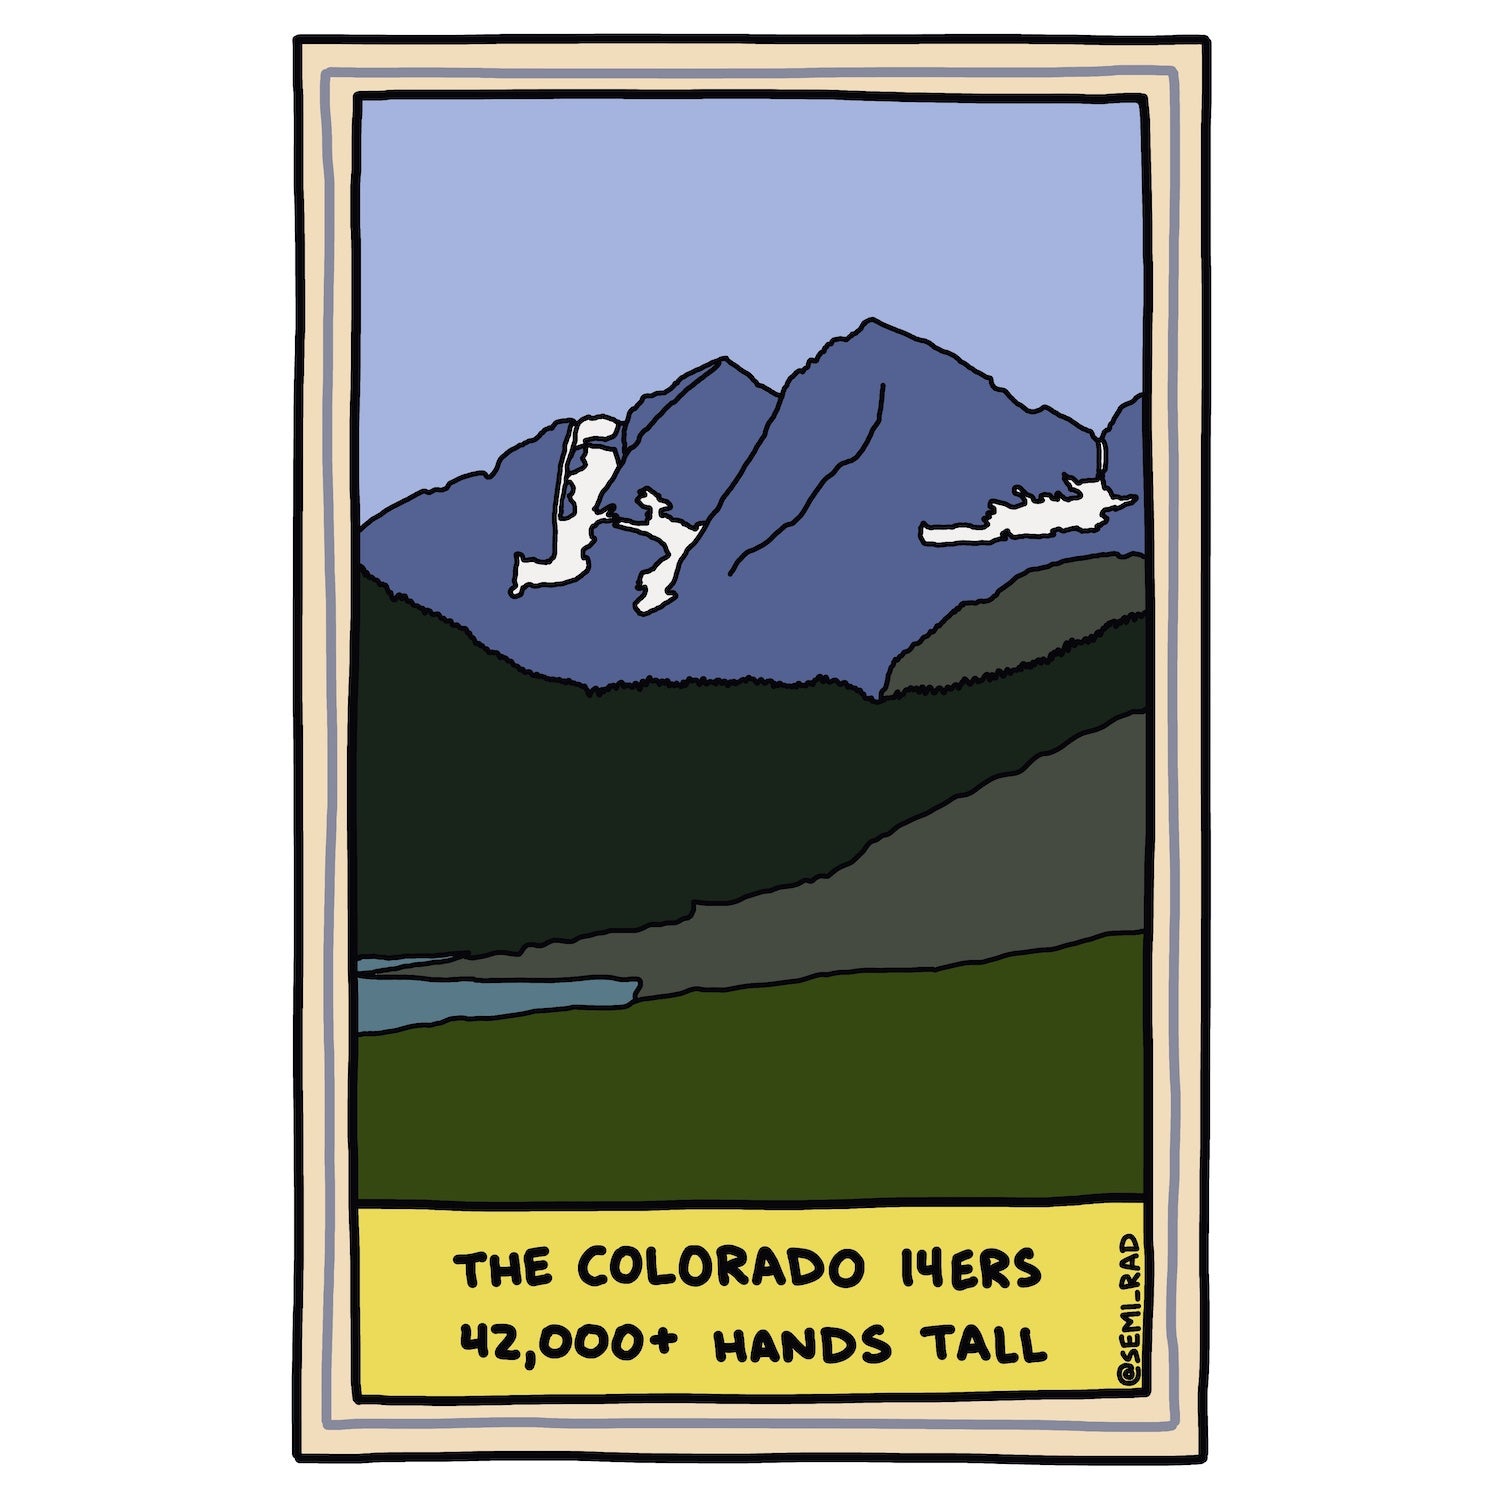 The Colorado 14ers: 42,000+ Hands Tall